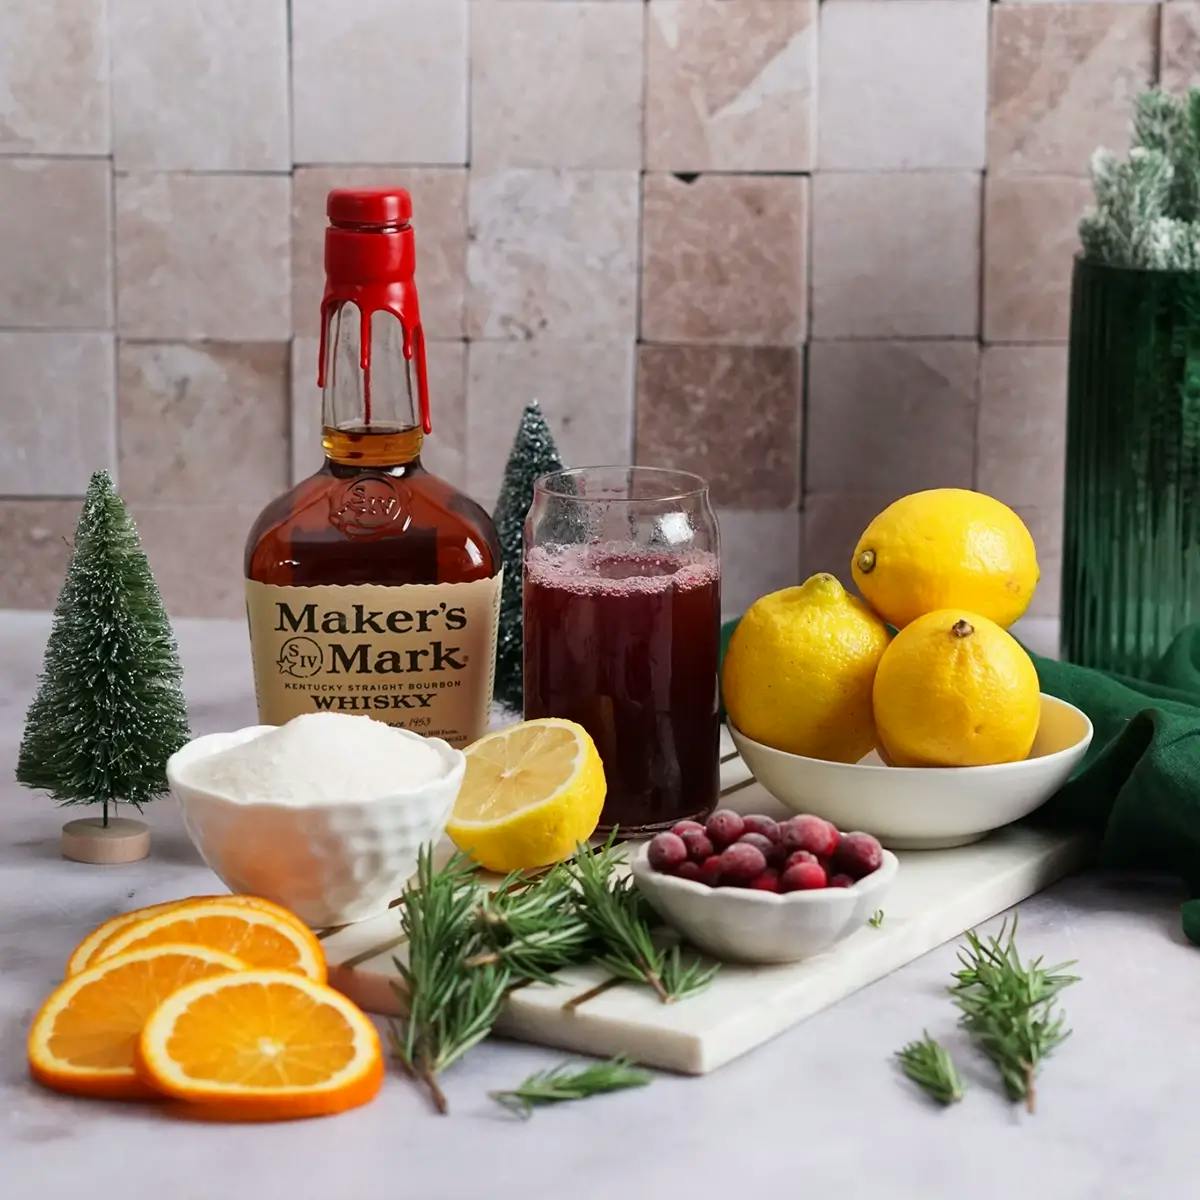 The ingredients for a Christmas punch recipe: Makers Mark bourbon, lemons, sugar, cranberries, and sliced oranges.